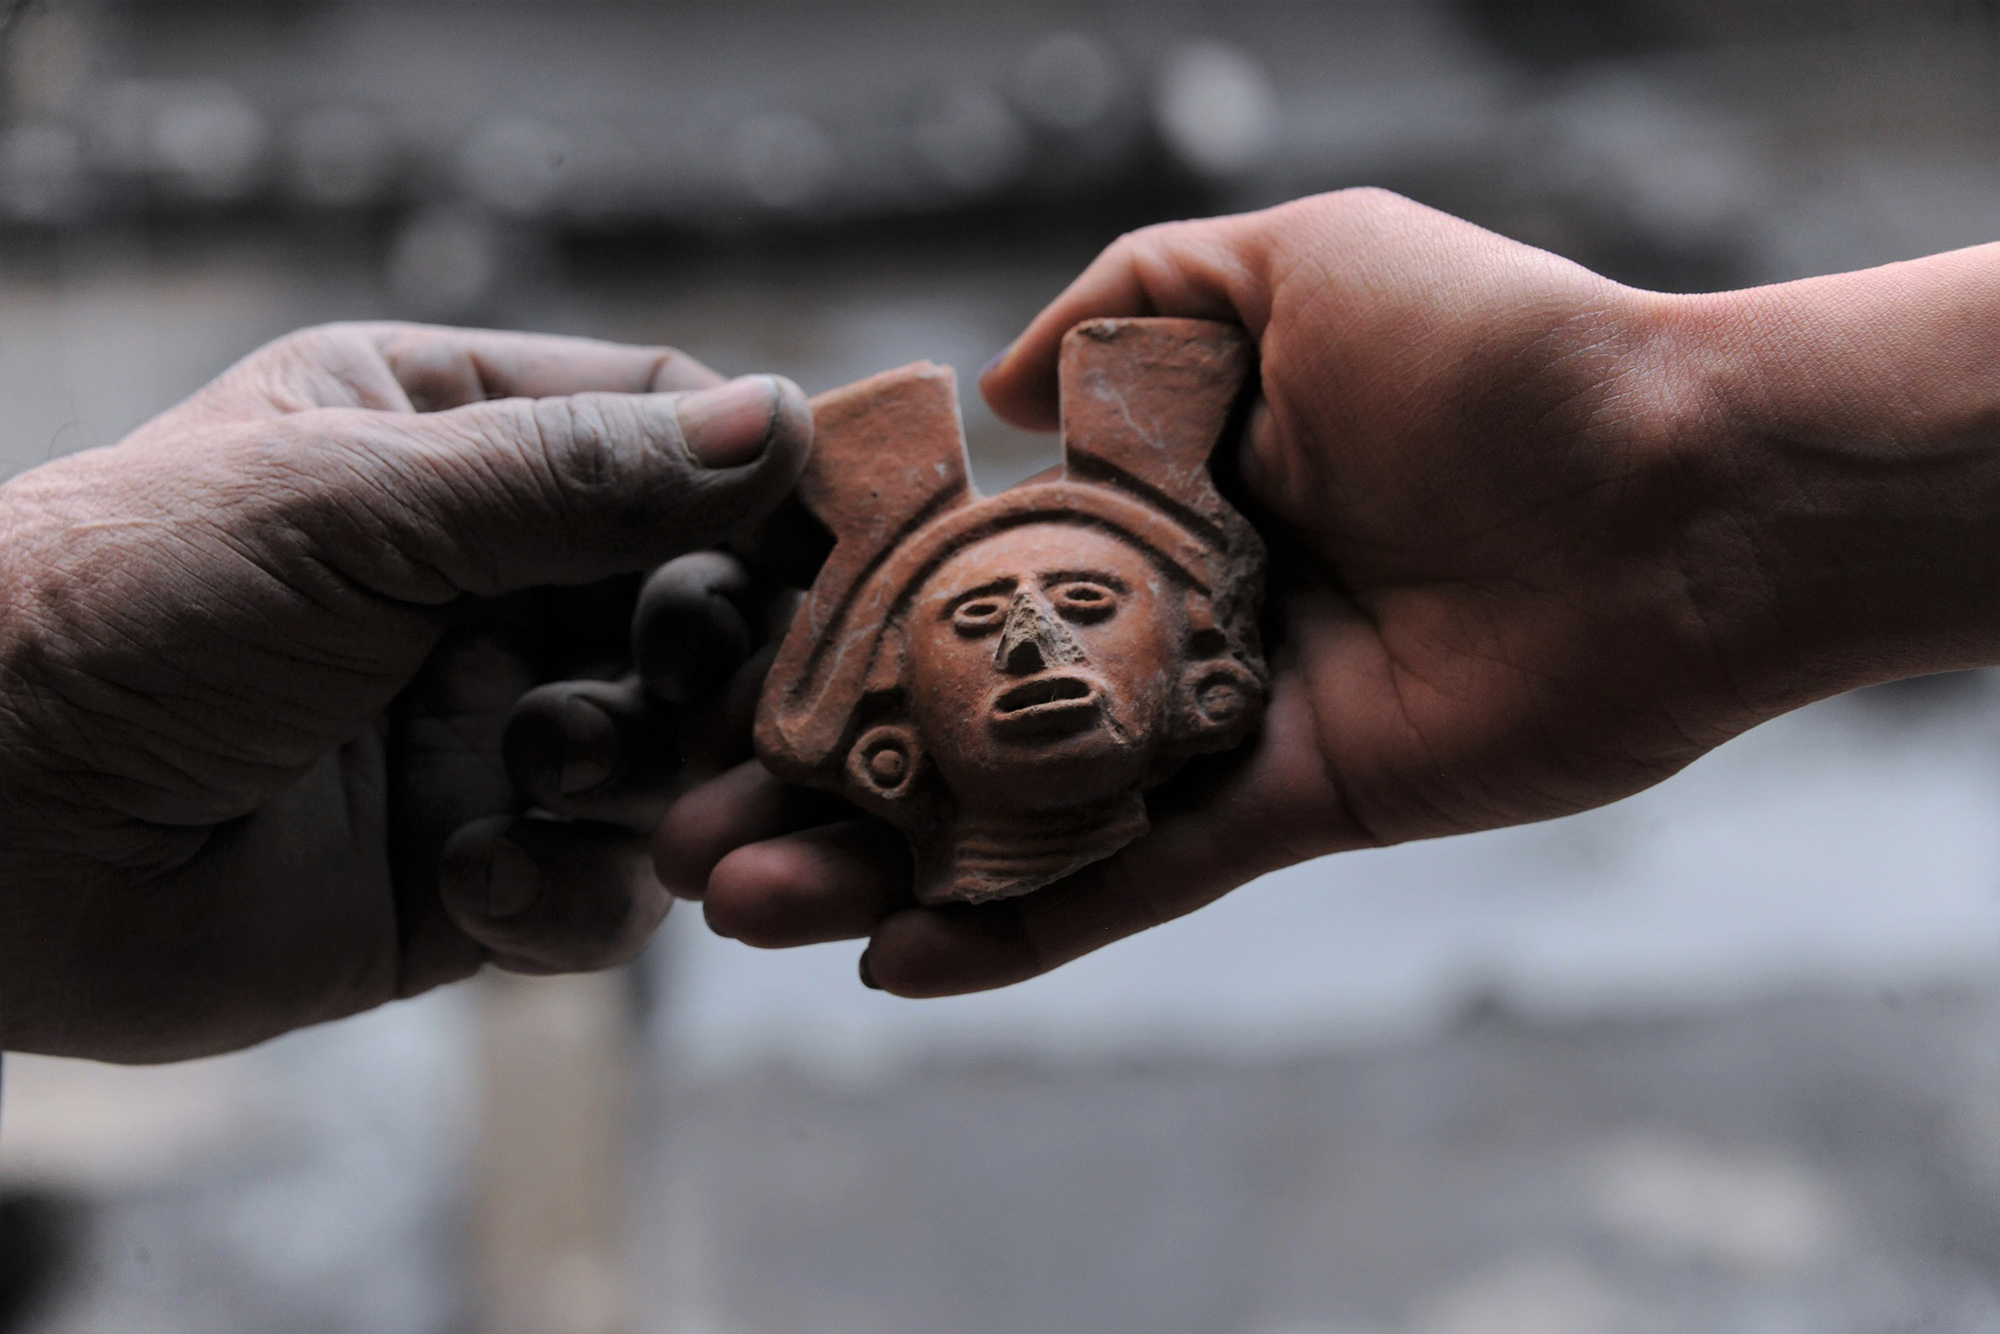 Figurine head found at an archeological site near what is now Garibaldi Plaza in Mexico City that is a representation of the goddess Cihuacoatl. (Mauricio Marat, National Institute of Anthropology and History/Zenger)